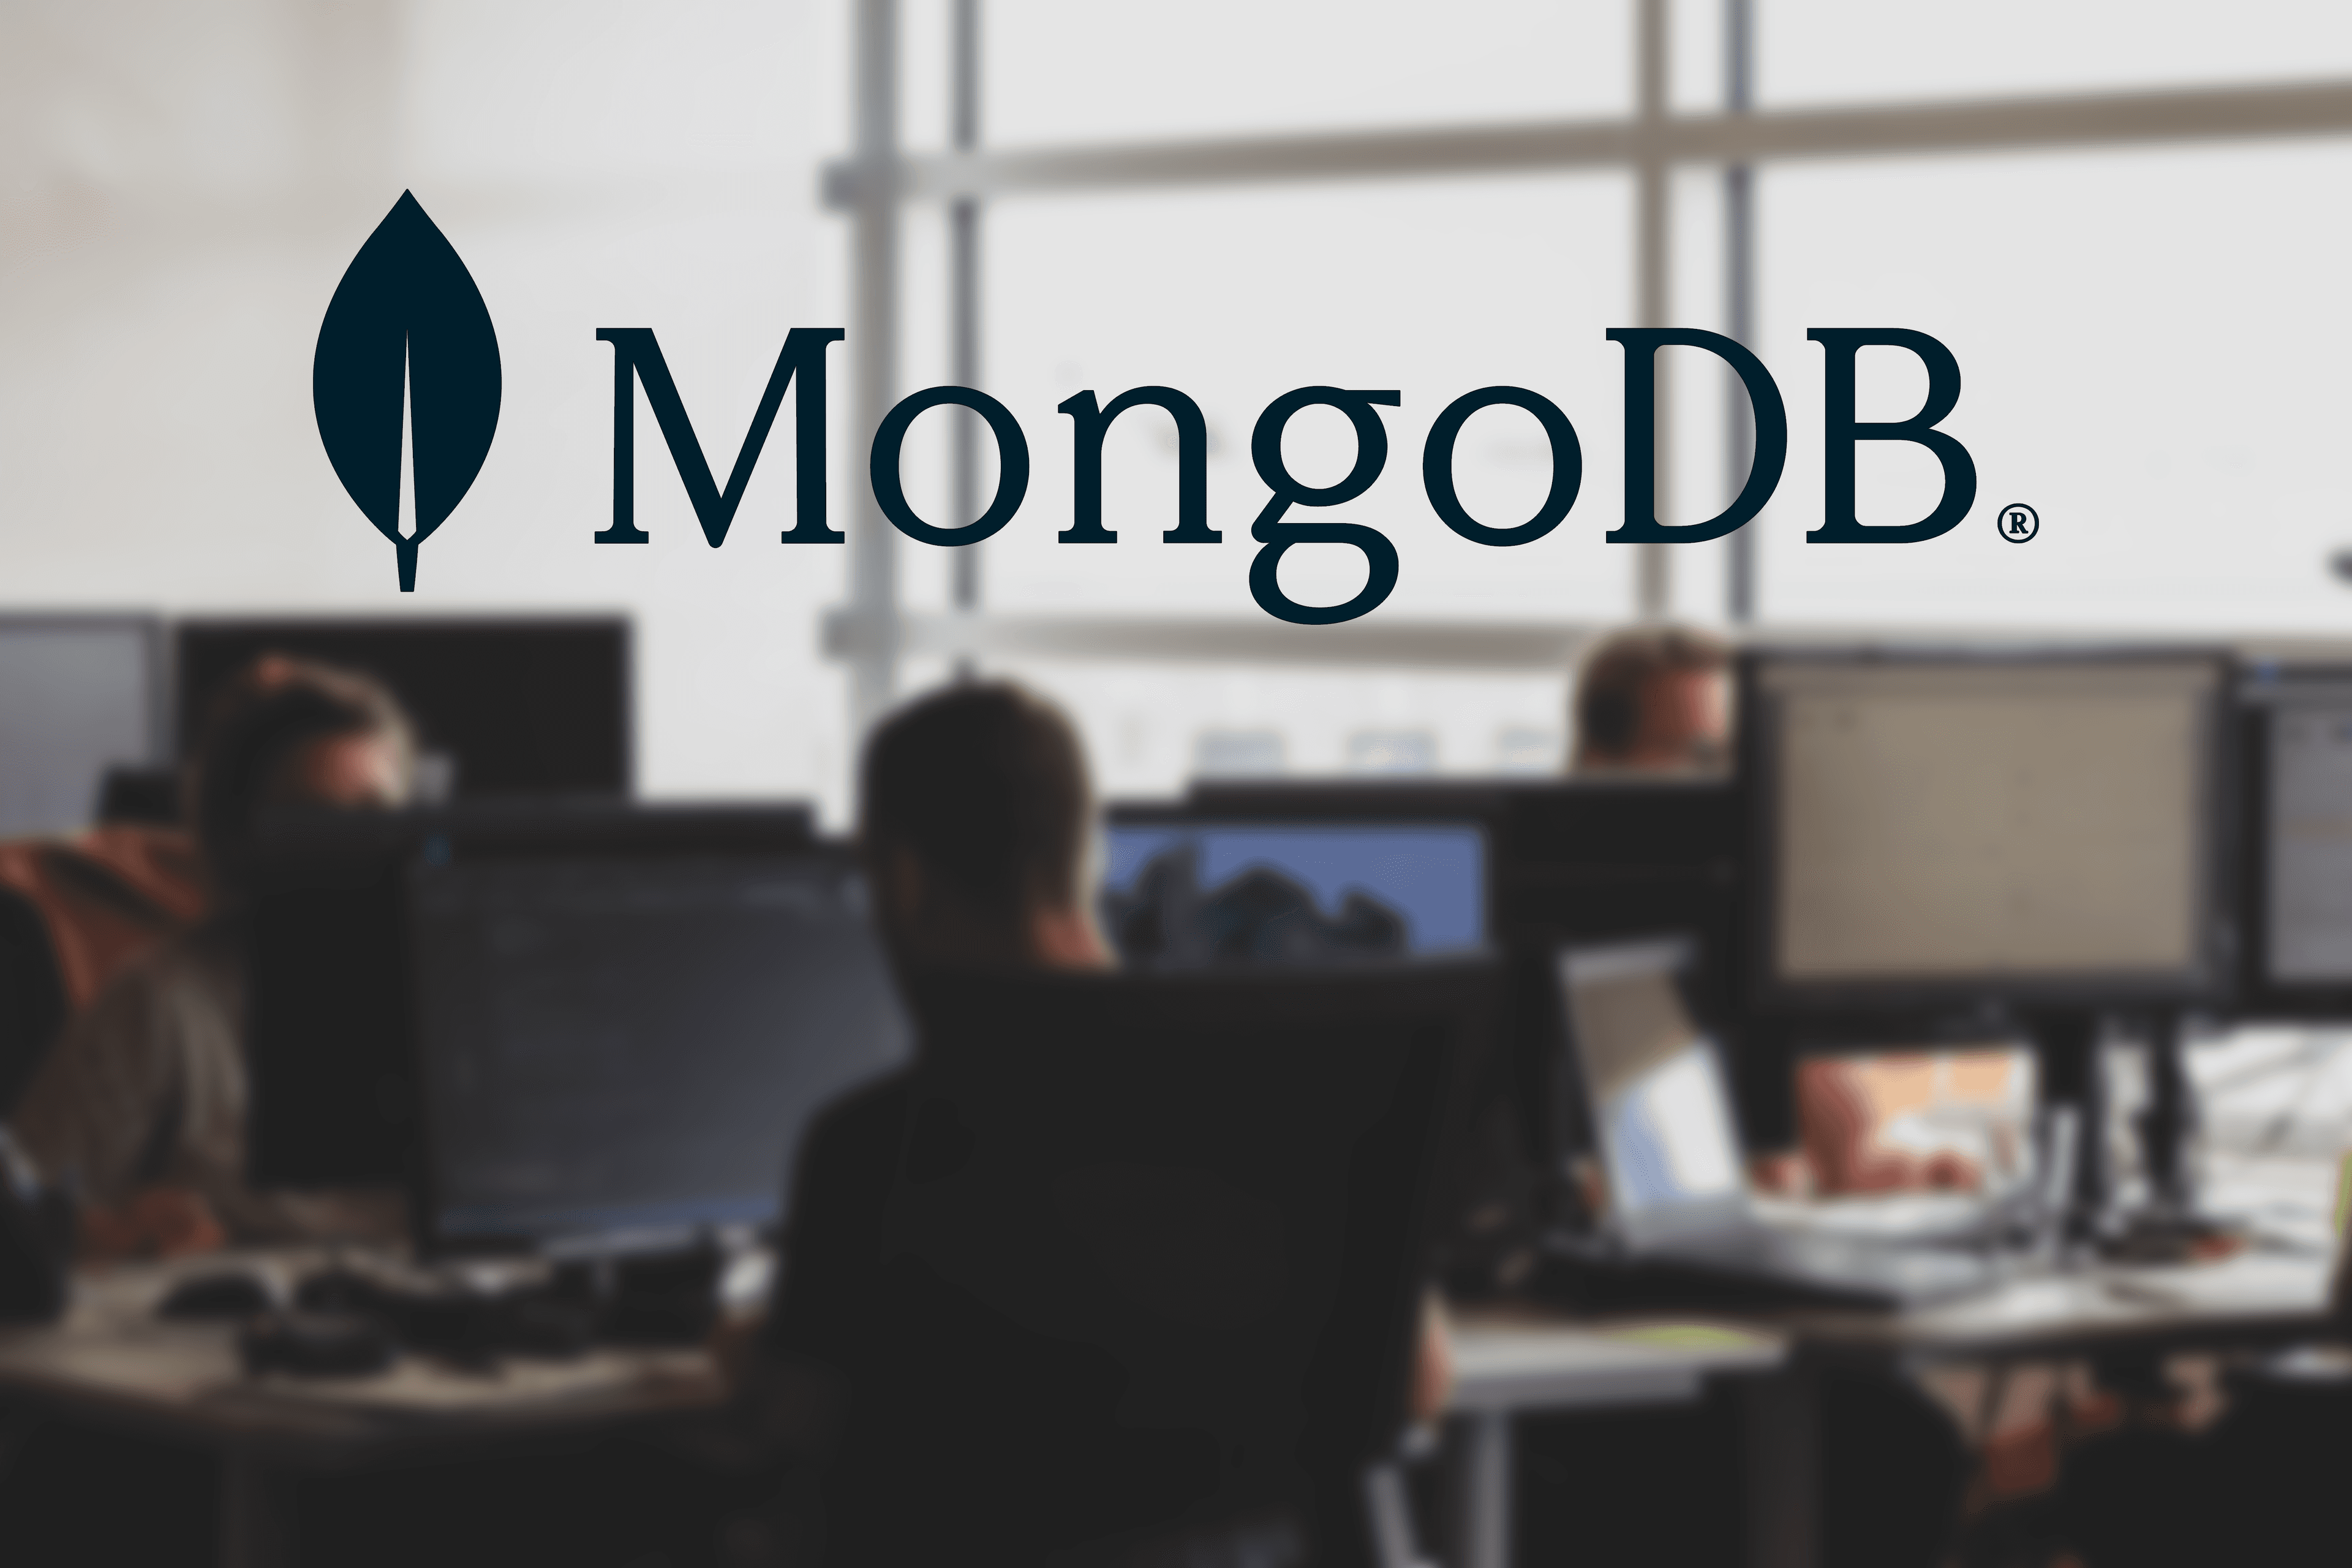 Developers working on computers with MongoDB logo in the foreground